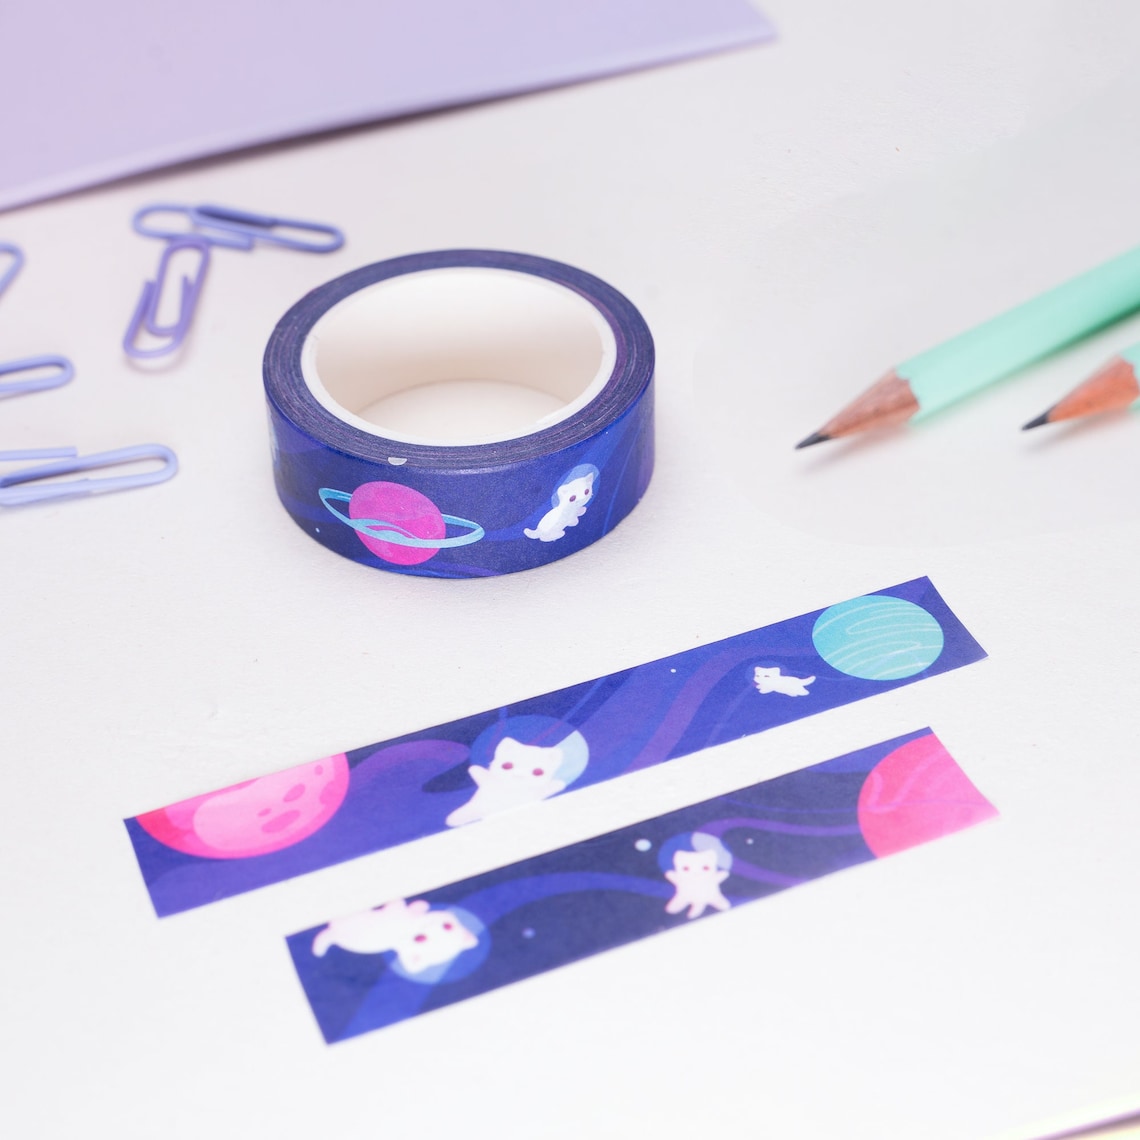 Cats In Space Washi Tape | 10m x 15mm Roll | Artist Masking Tape | Decorative Planner Tape | Kawaii Calendars Journal Stationery | Miamouz